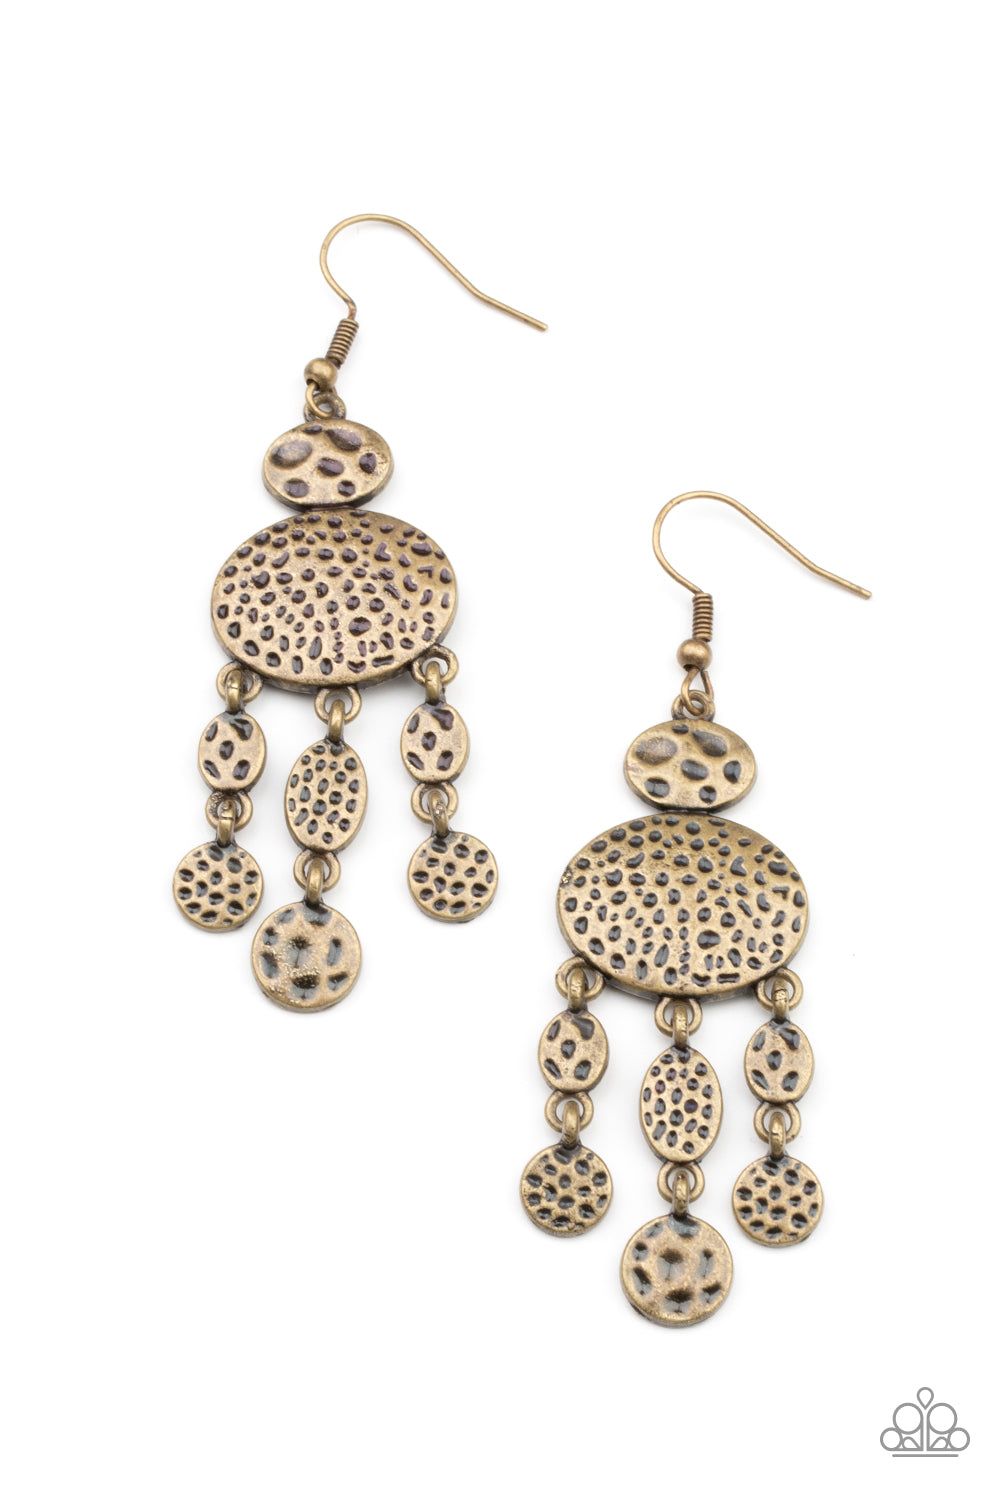 Get Your ARTIFACTS Straight - Brass Earrings- Paparazzi Accessories